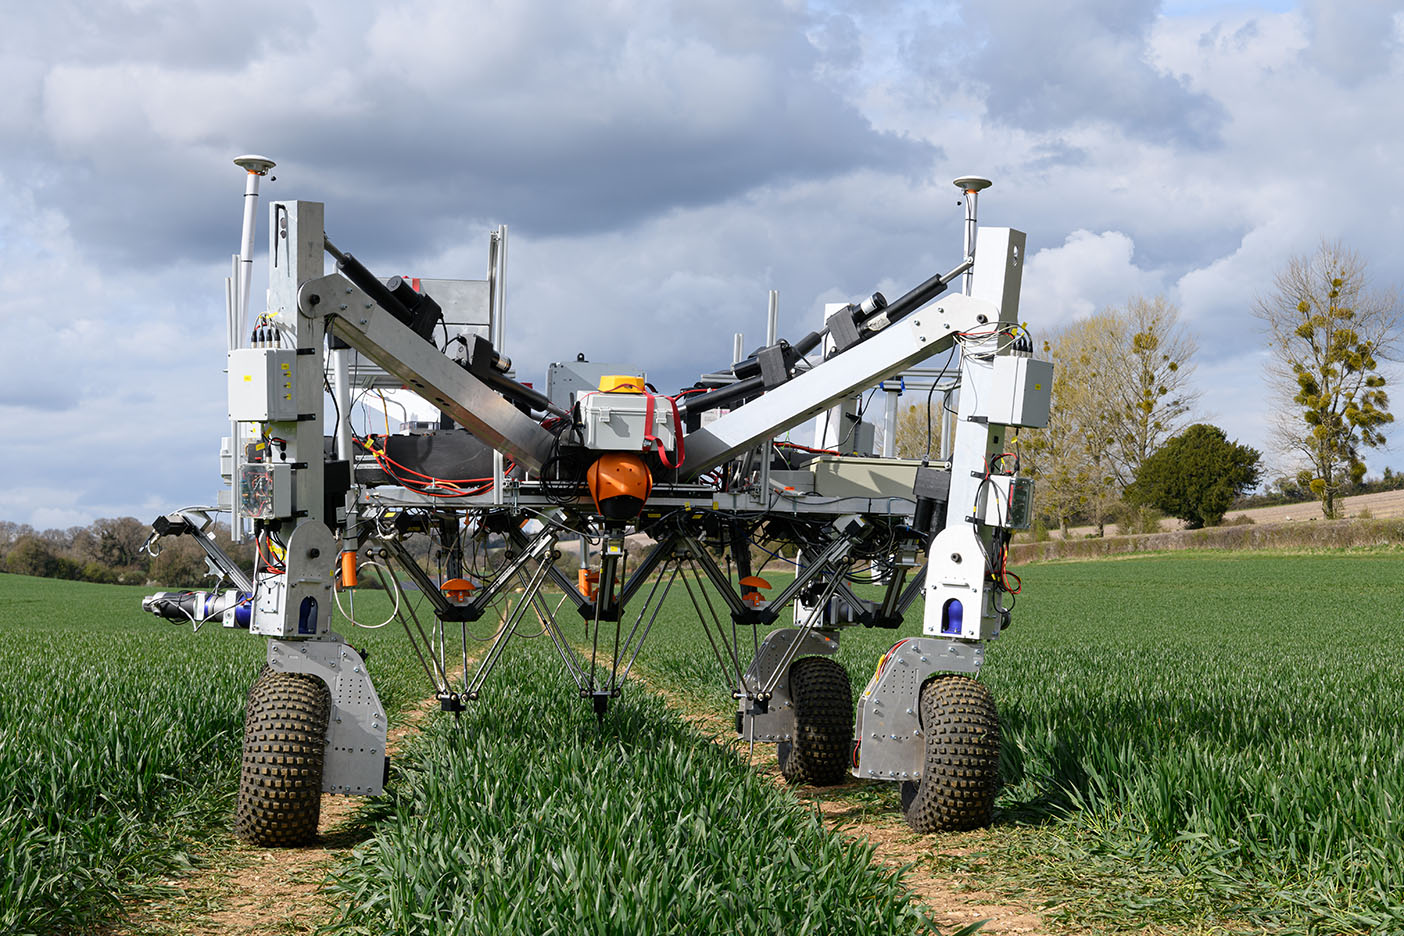 The ‘Dick’ robot prototype deploys RootWave non-chemical weeding technology mounted on an igus delta robotic arm to zap the weeds.